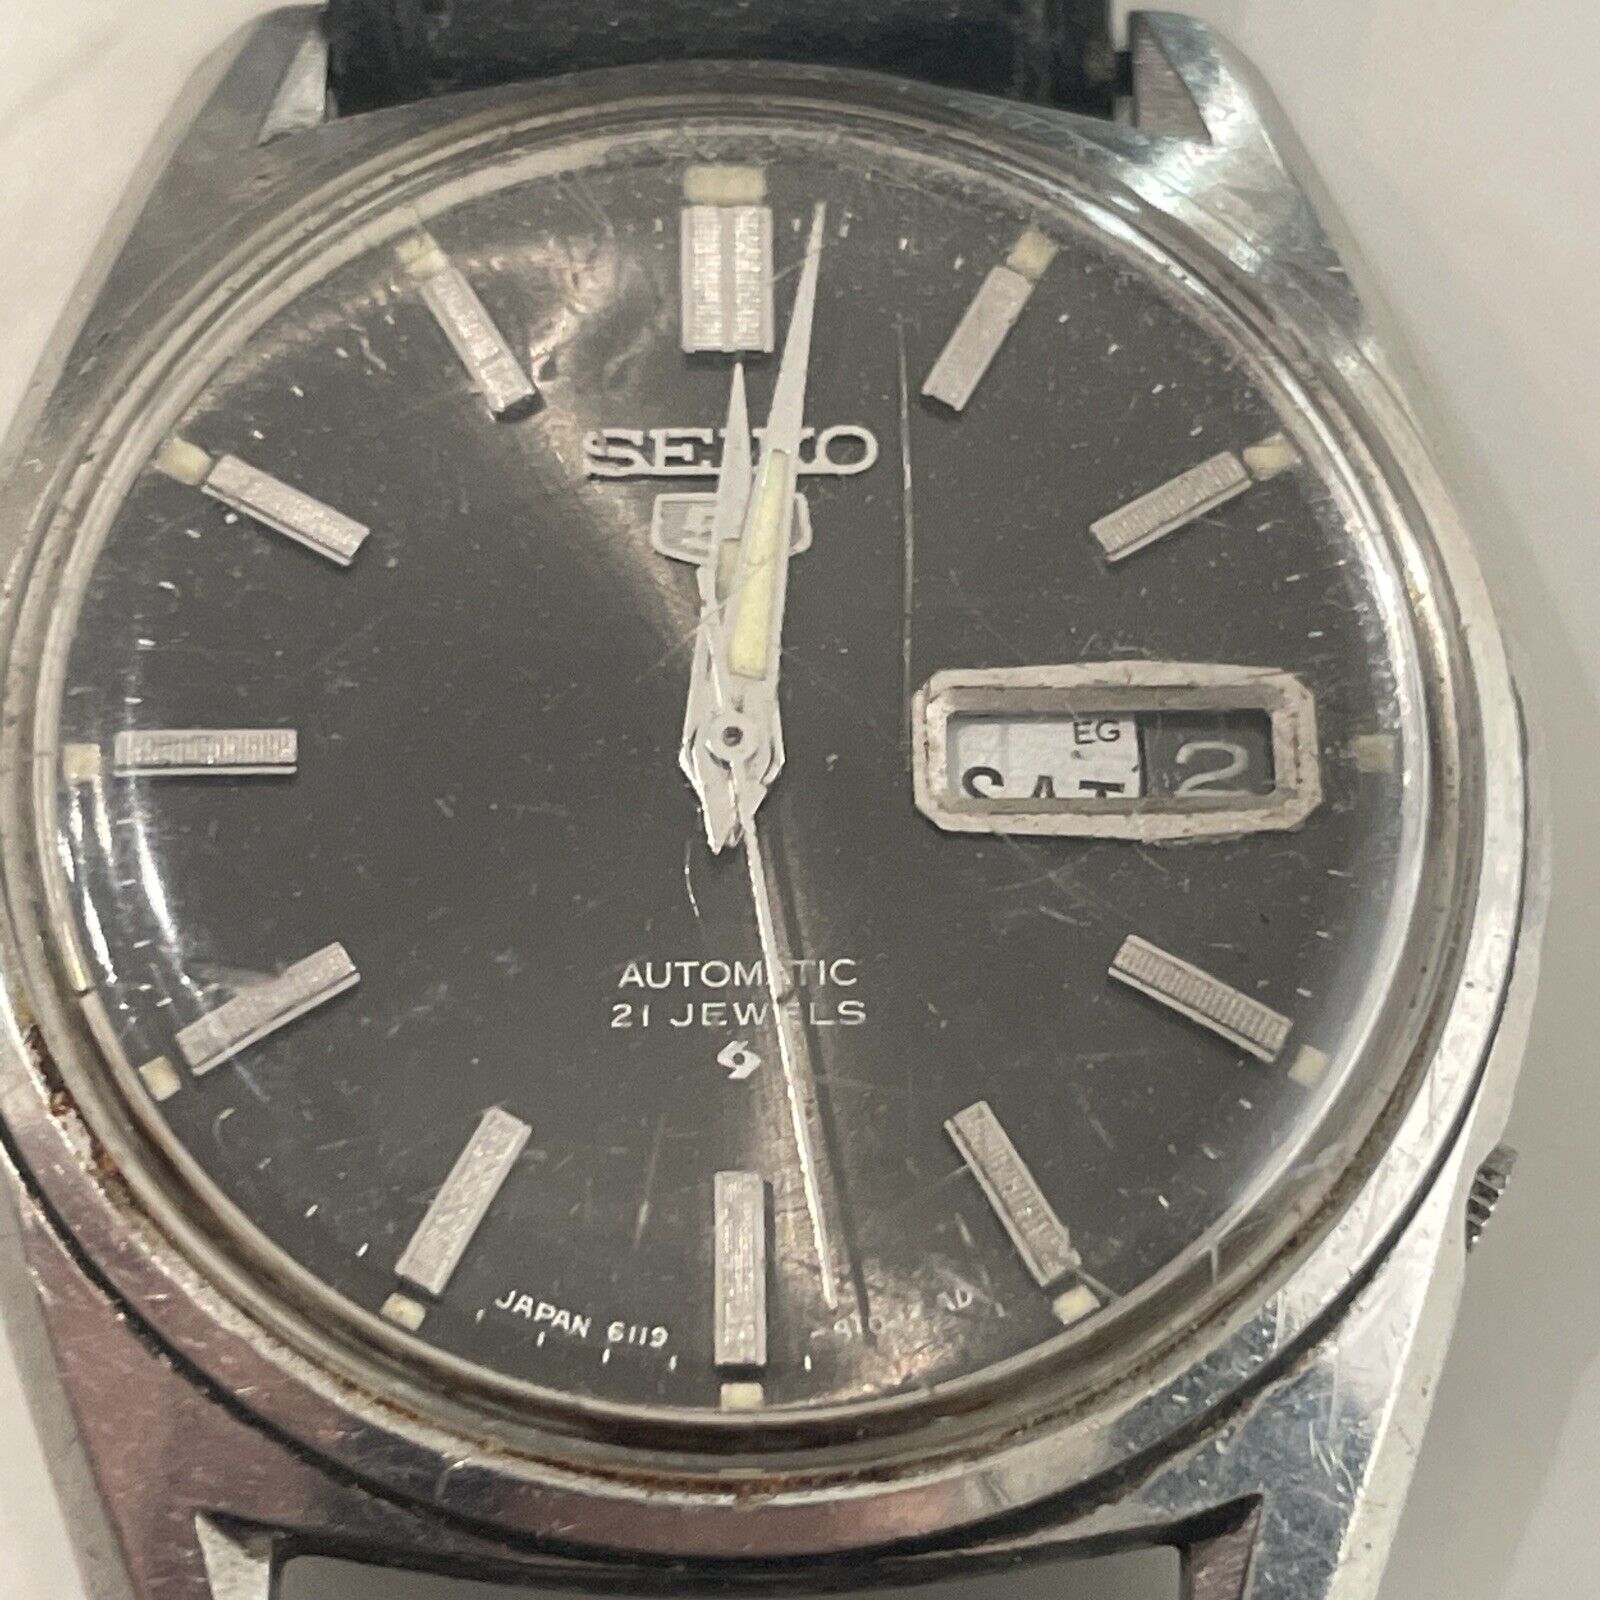 vintage seiko 5 automatic day date movement no. 6119-8093 Japan made men's watch